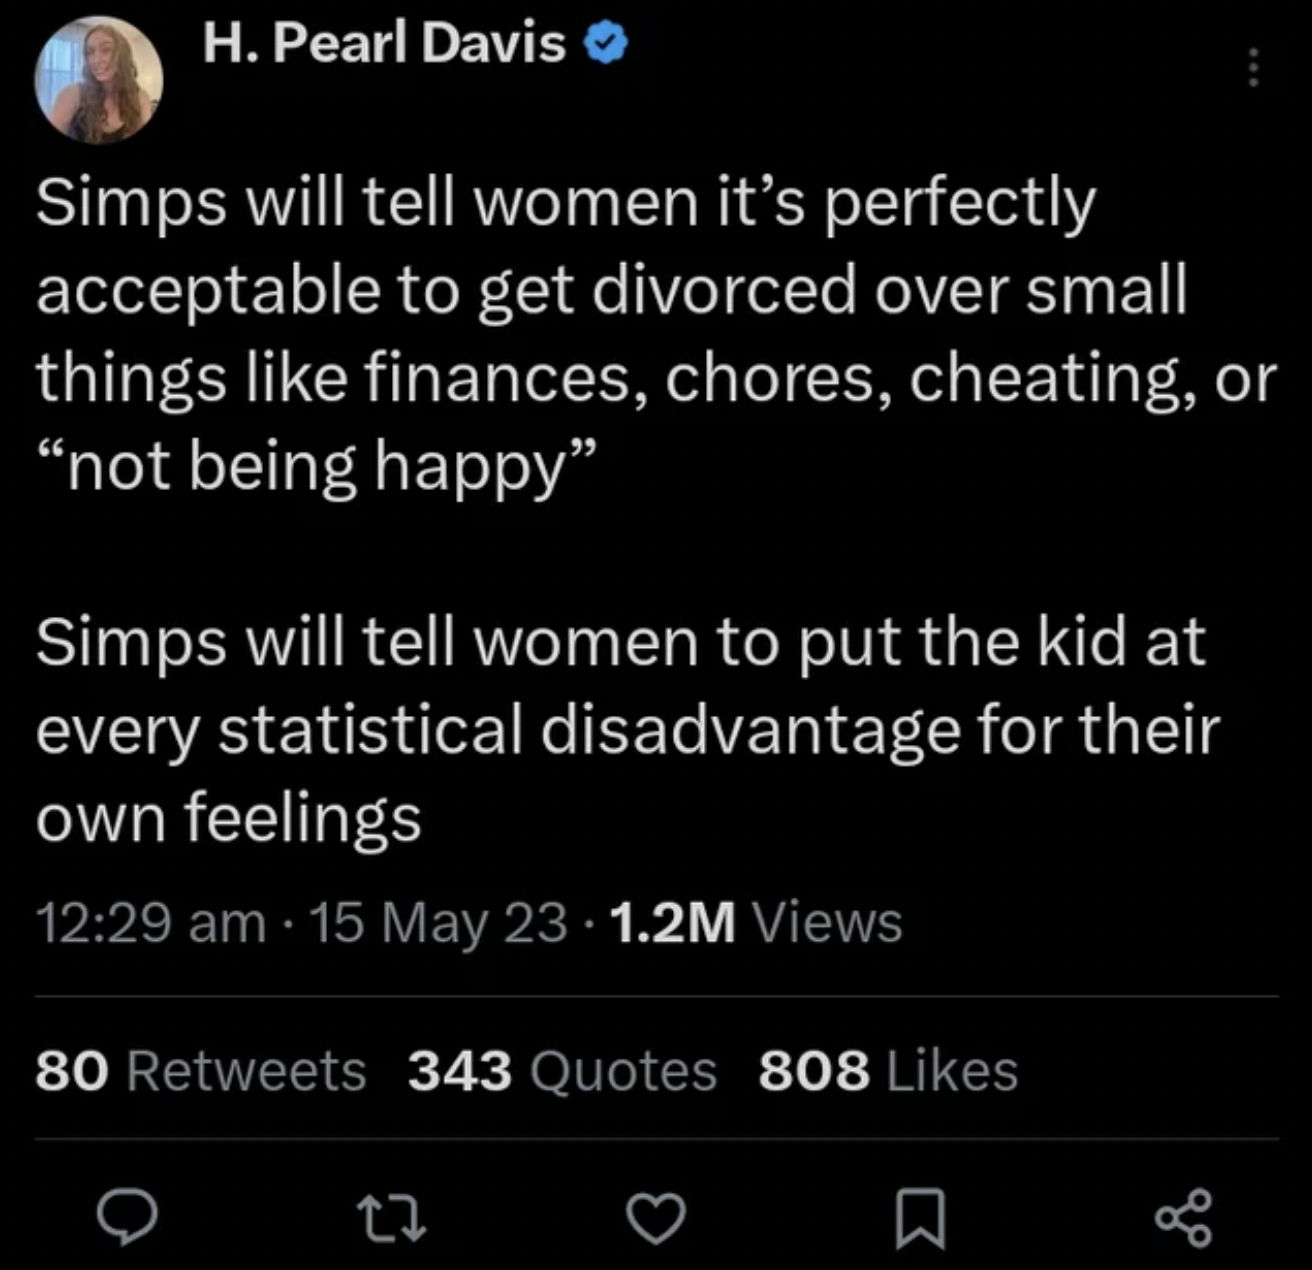 Facepalms - will tell women it's perfectly acceptable to get divorced over small things finances, chores, cheating, or